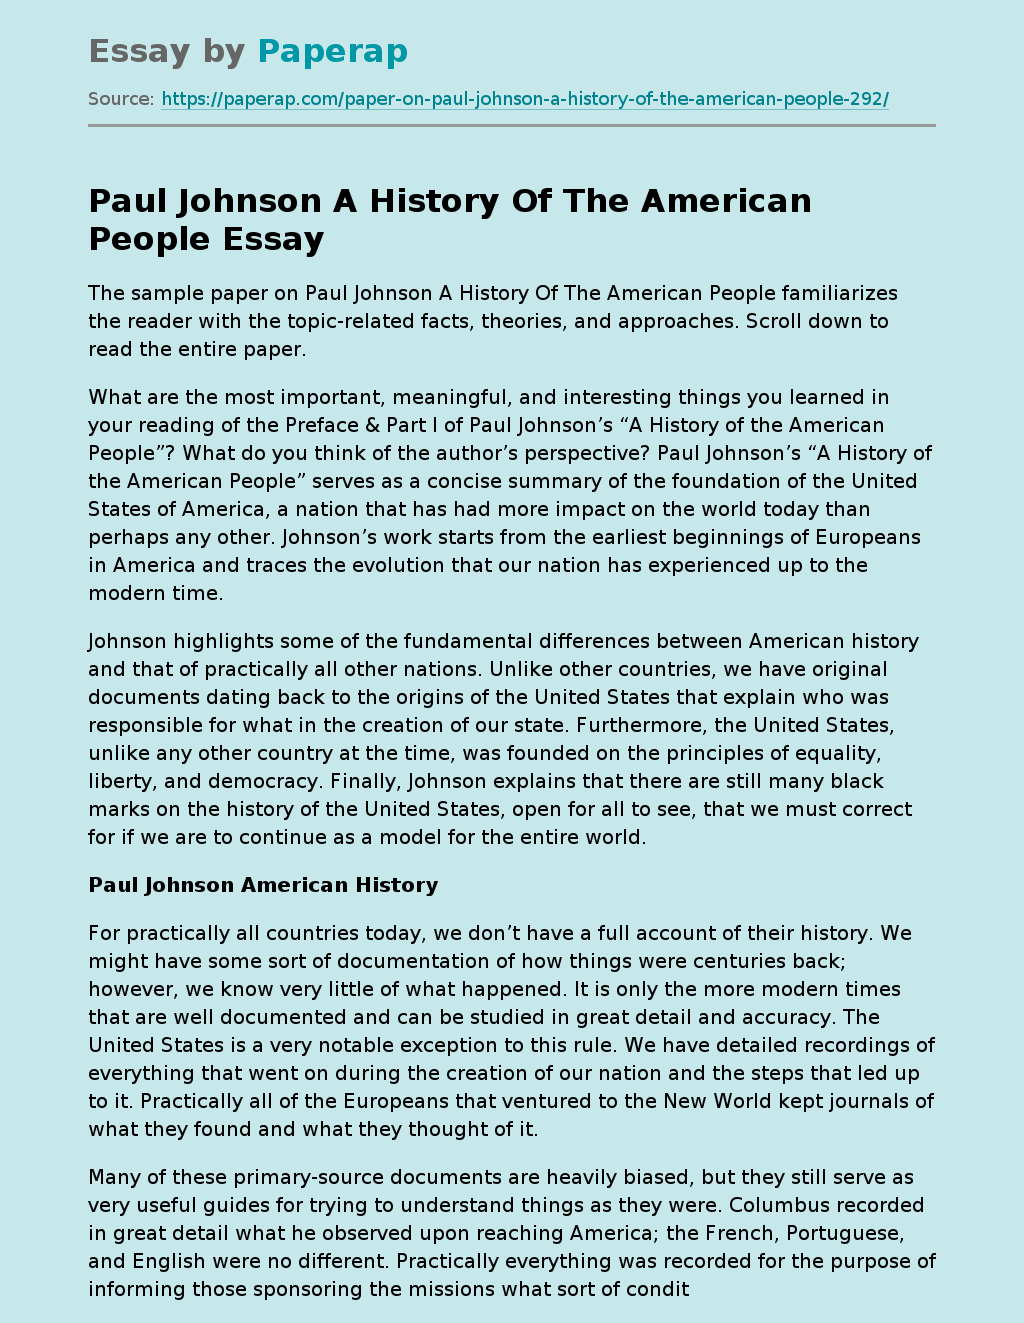 Paul Johnson A History Of The American People